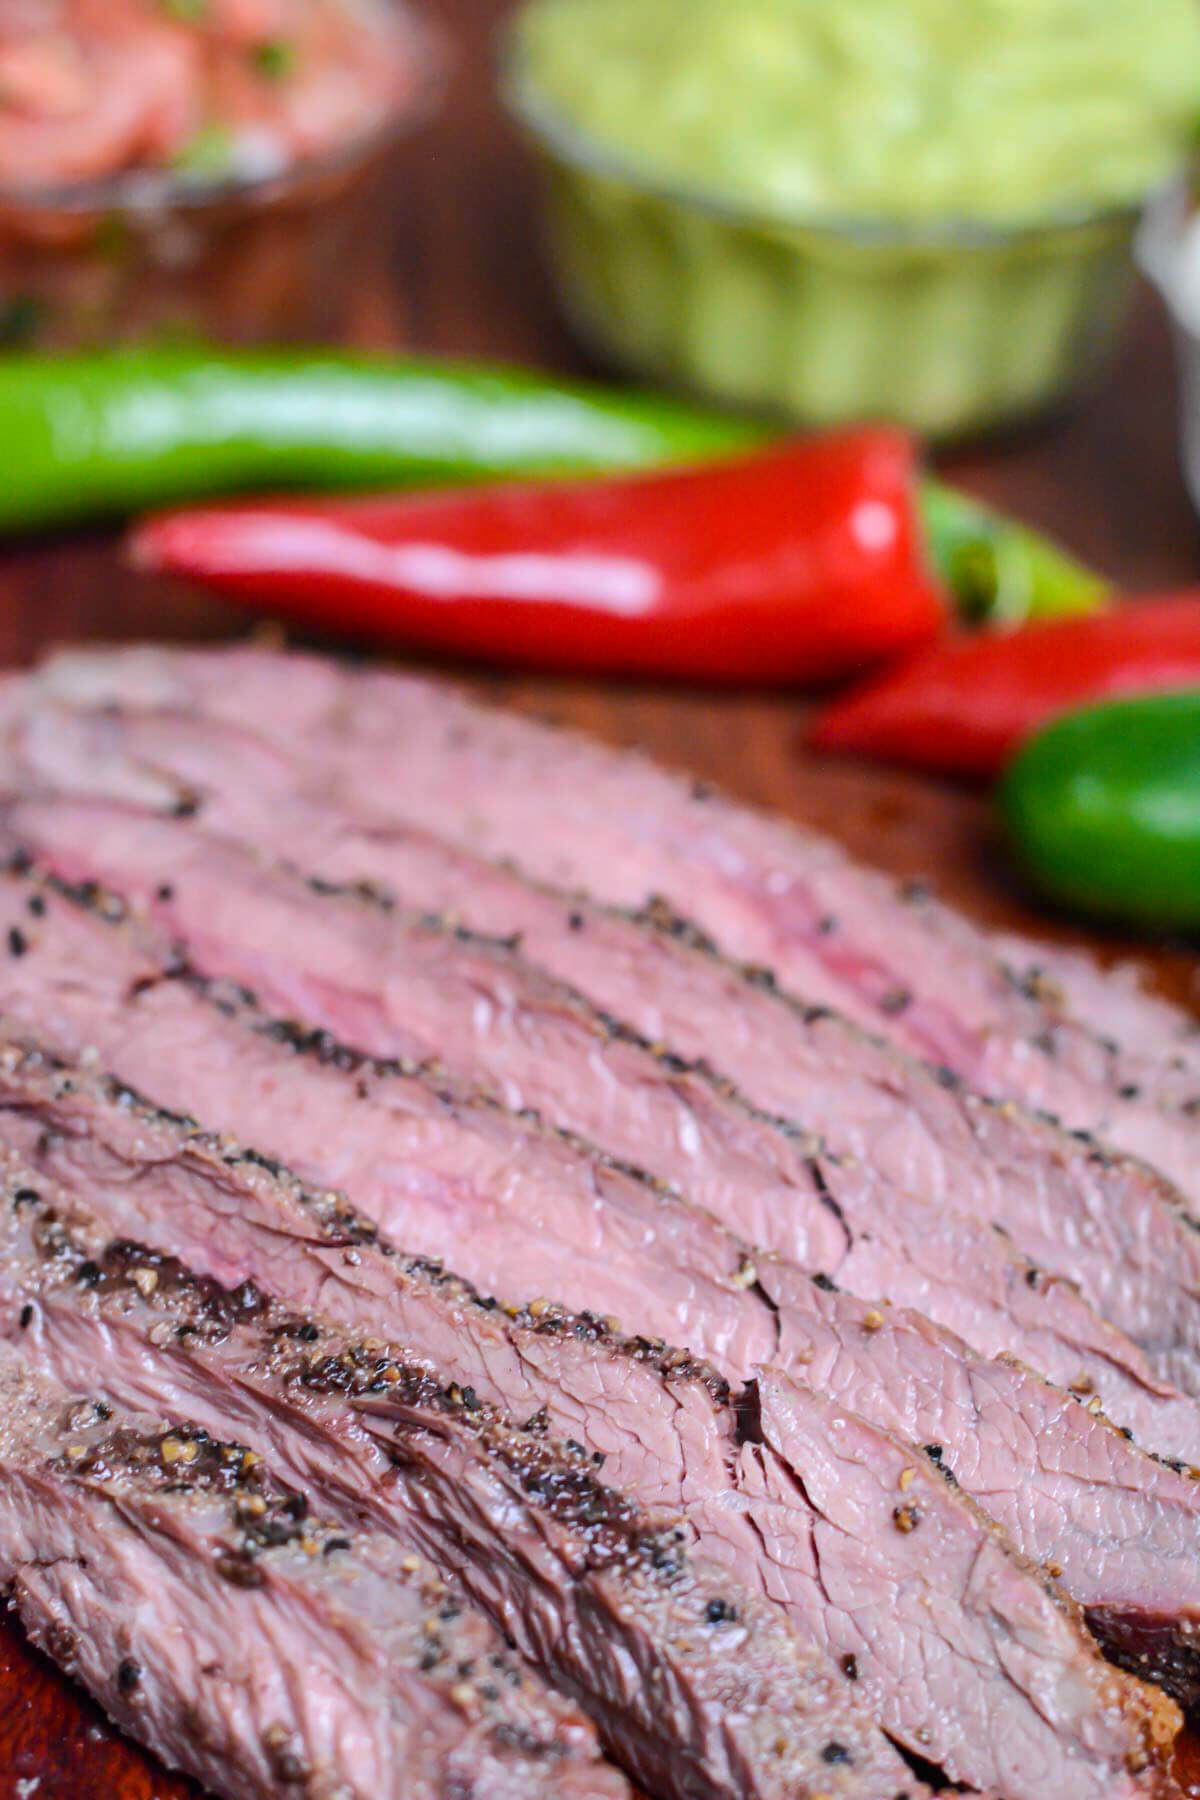 Sliced smoked flank steak on wooden table with hot peppers.